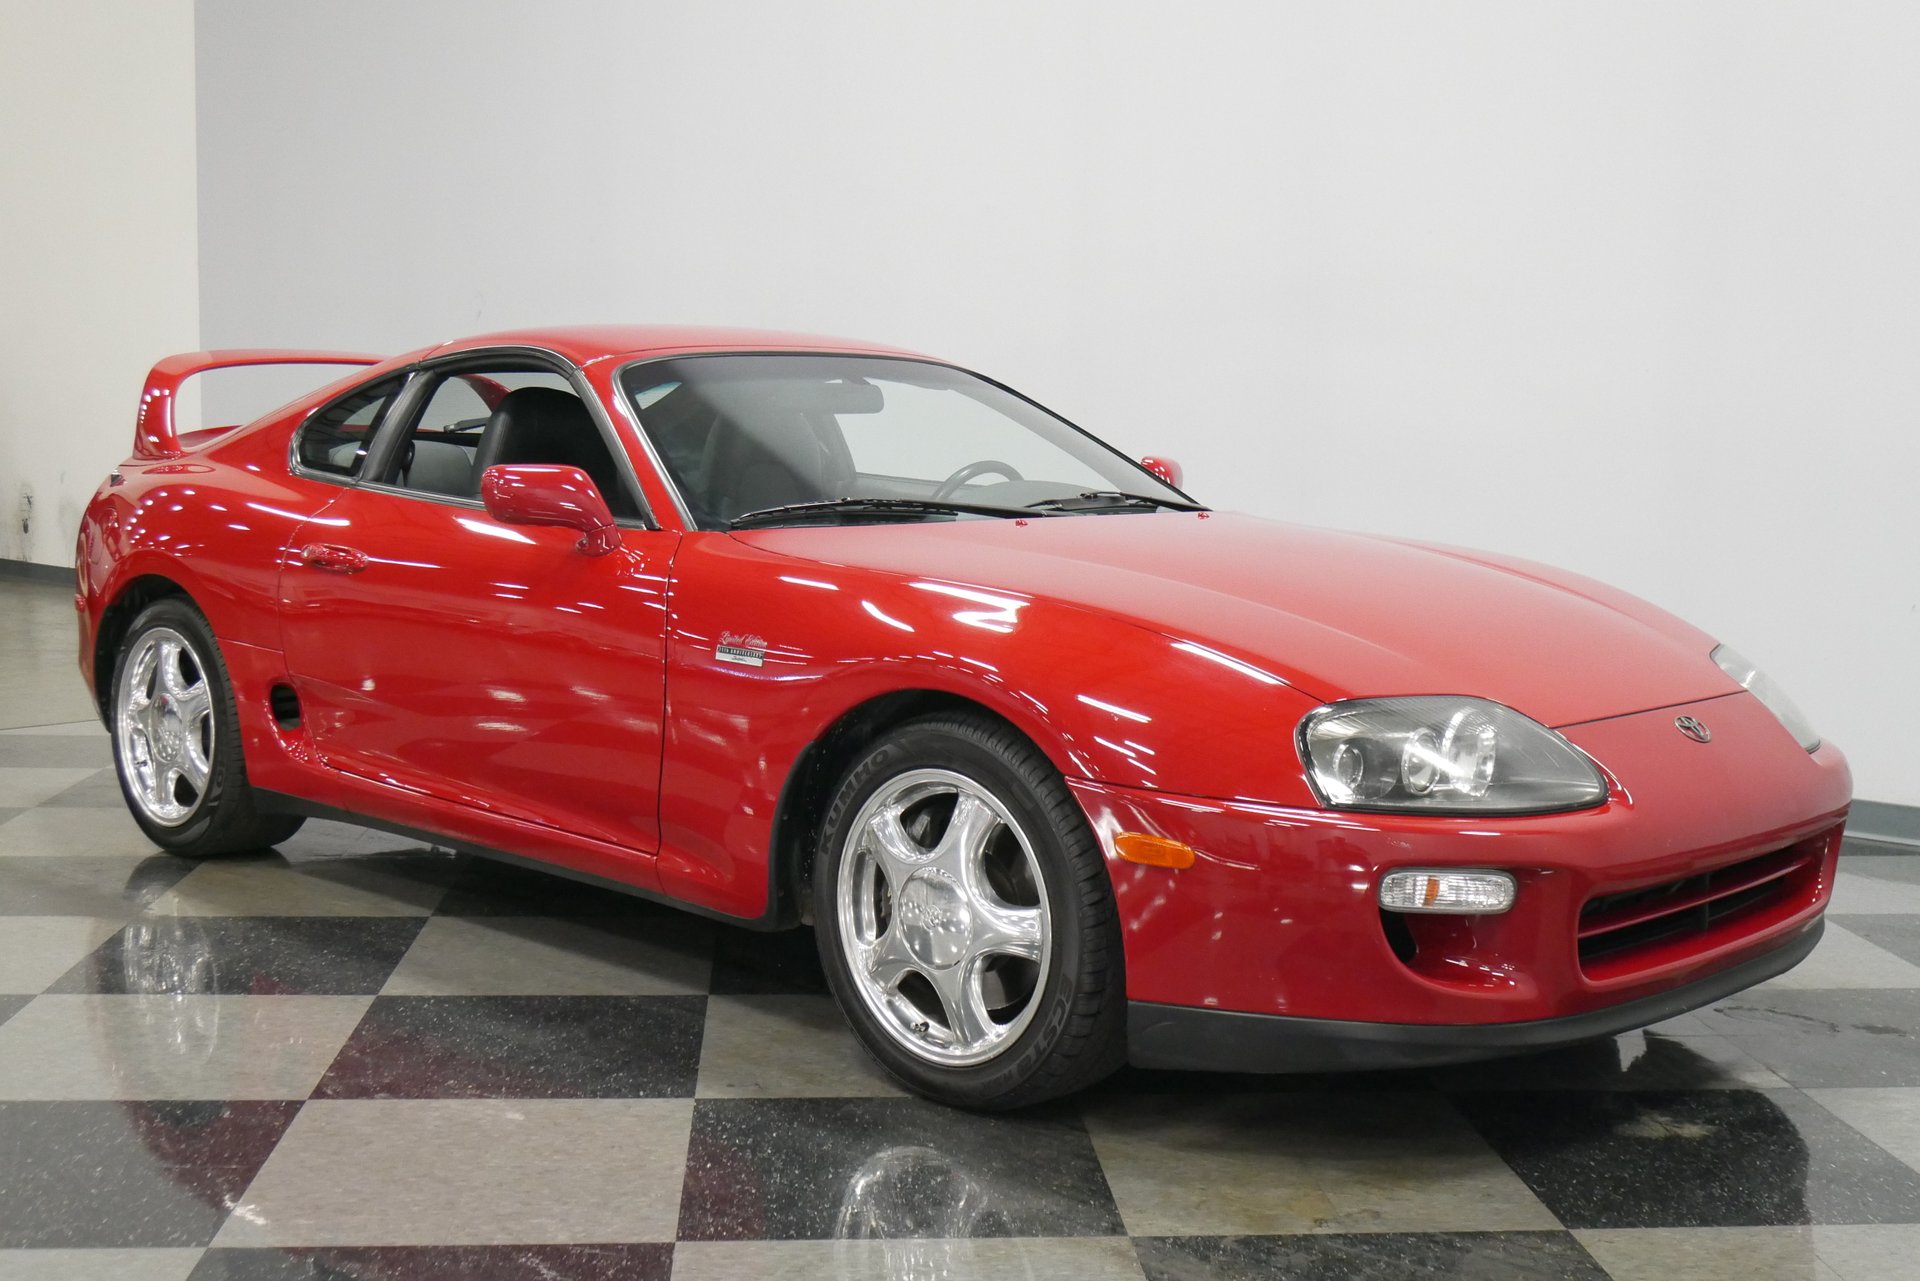 This 1997 Toyota Supra just sold for P4.38 million